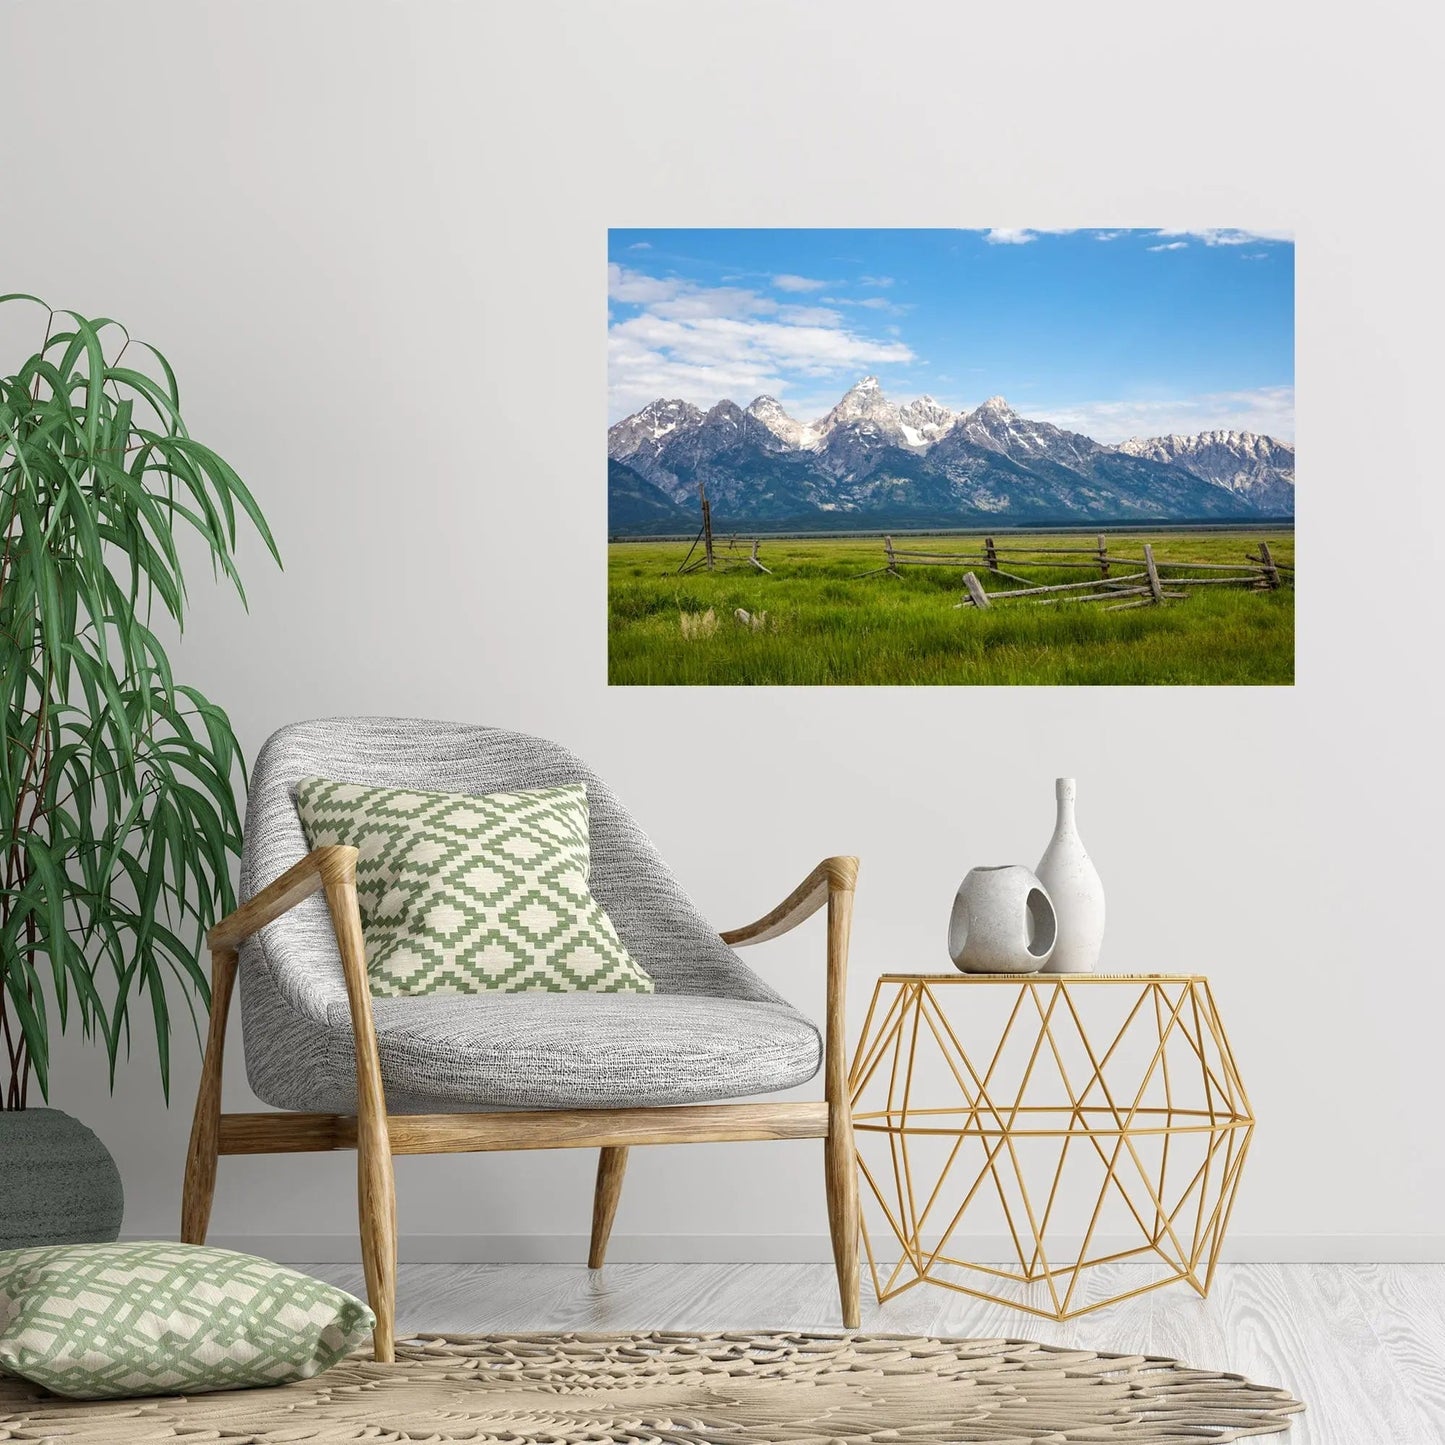 Art of Grand Tetons landscape with a rustic wooden fence hanging on a wall in casua setting with gray chair green accents 